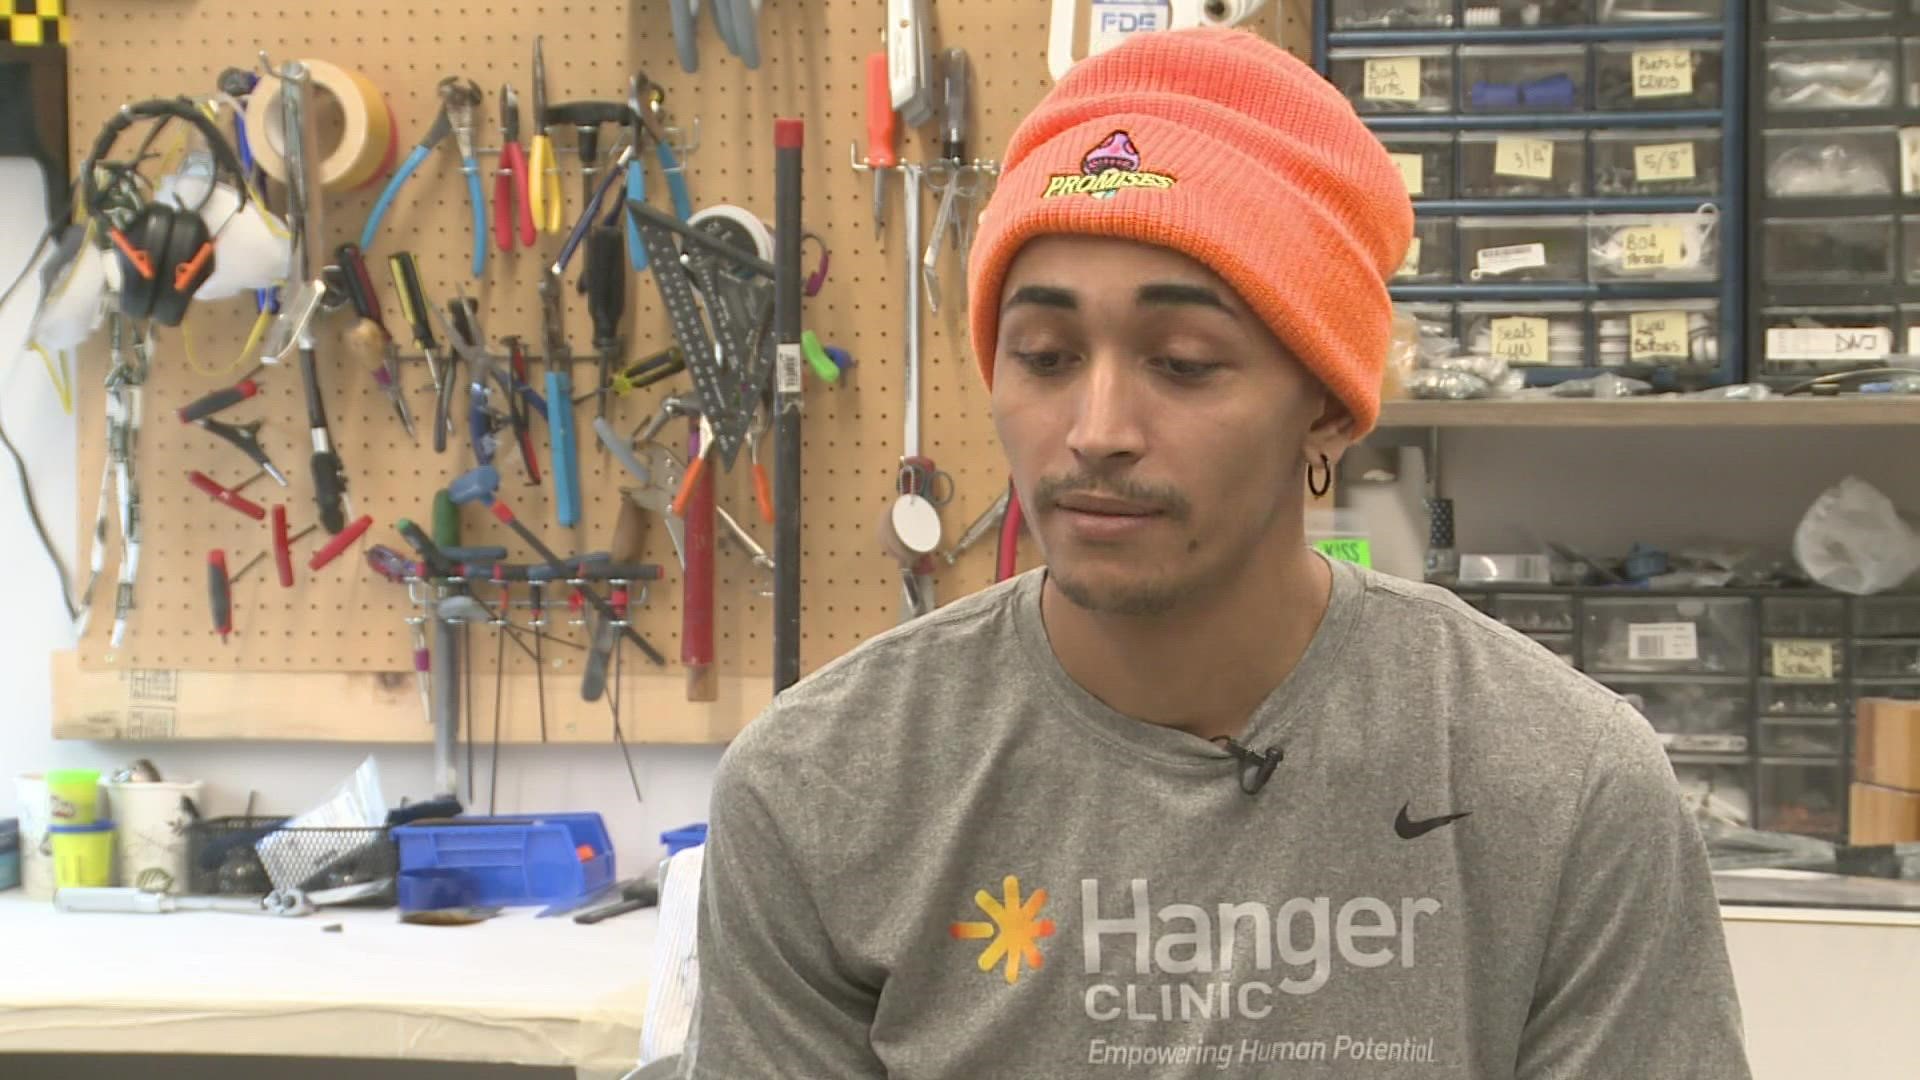 Amer Gasmi has needed new prosthetics for the past four years. Hip hop connections led him to Byron Center and the Hanger Clinic.